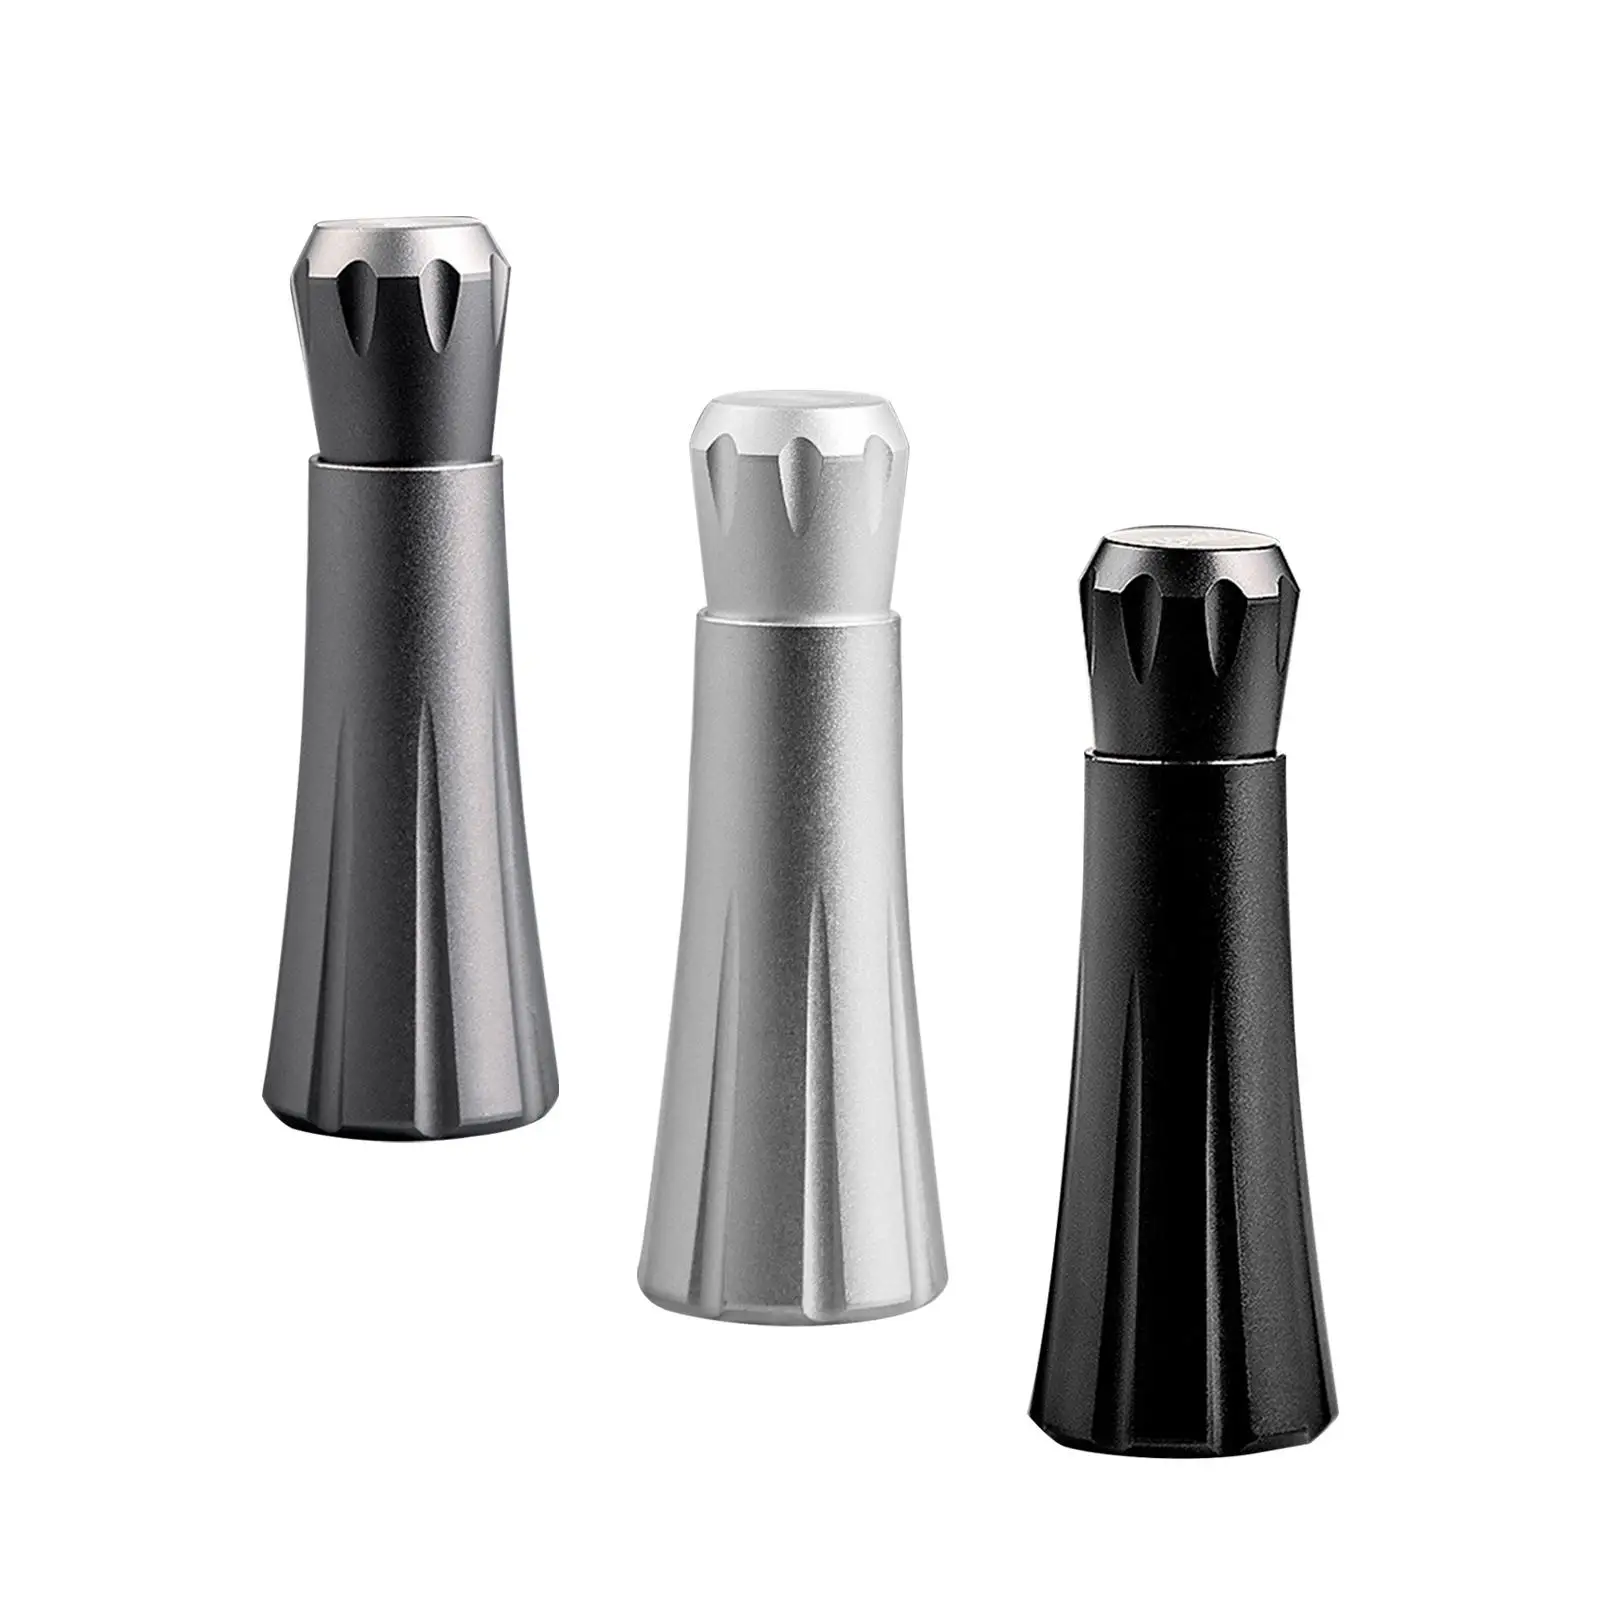 Coffee Stirring Tamper Coffee Tamper Distributor Coffee Leveler Tool Hand Stirrer Tool Portable Espresso Tools for Home Gifts